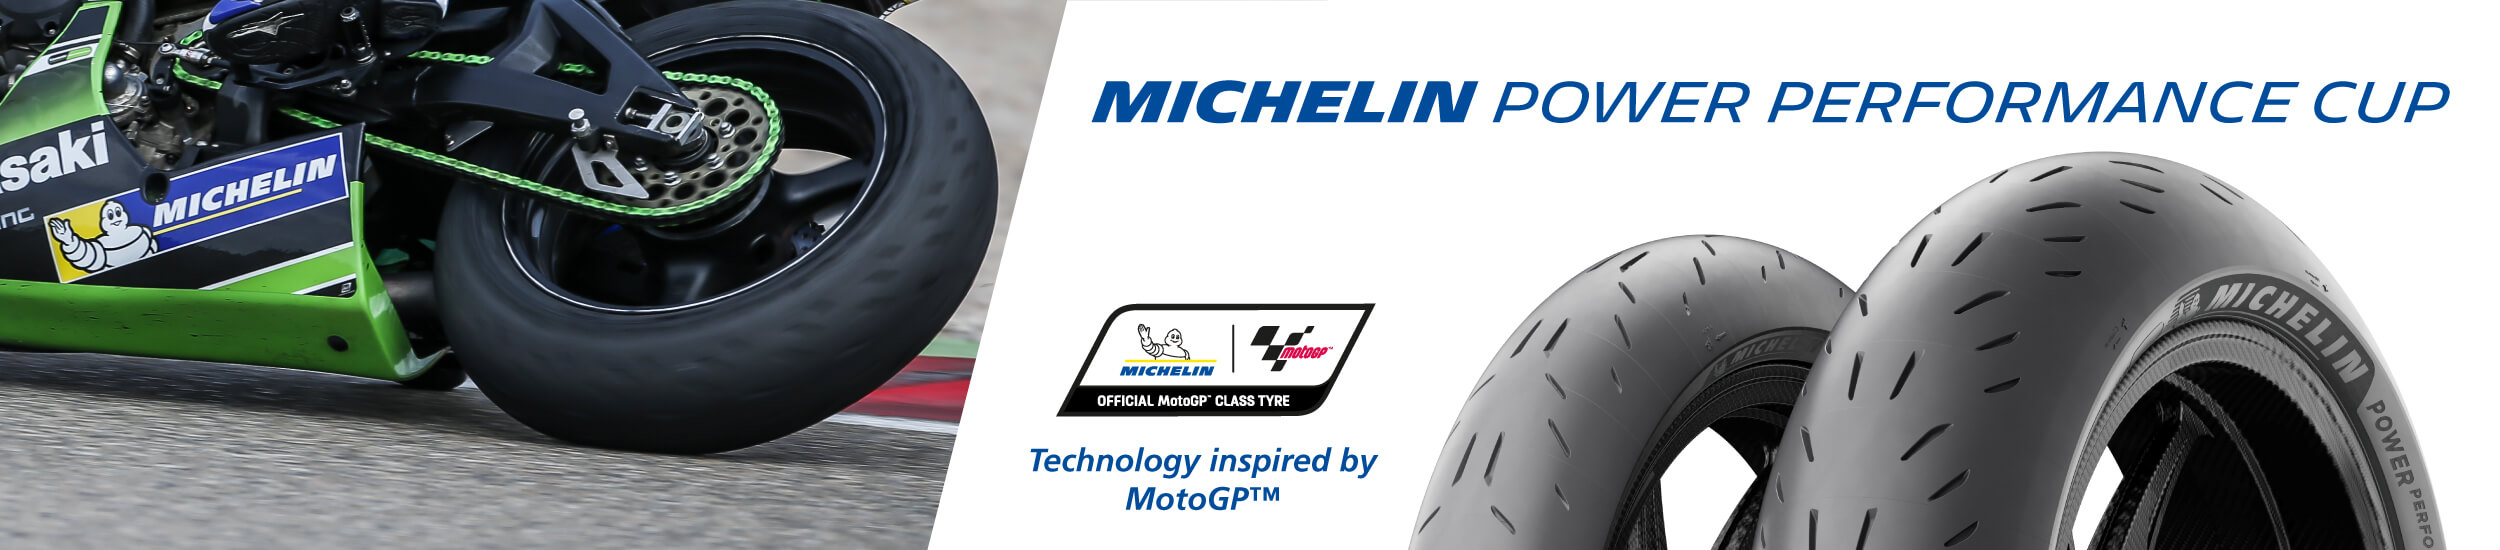 Michelin Power Performance Cup Banner